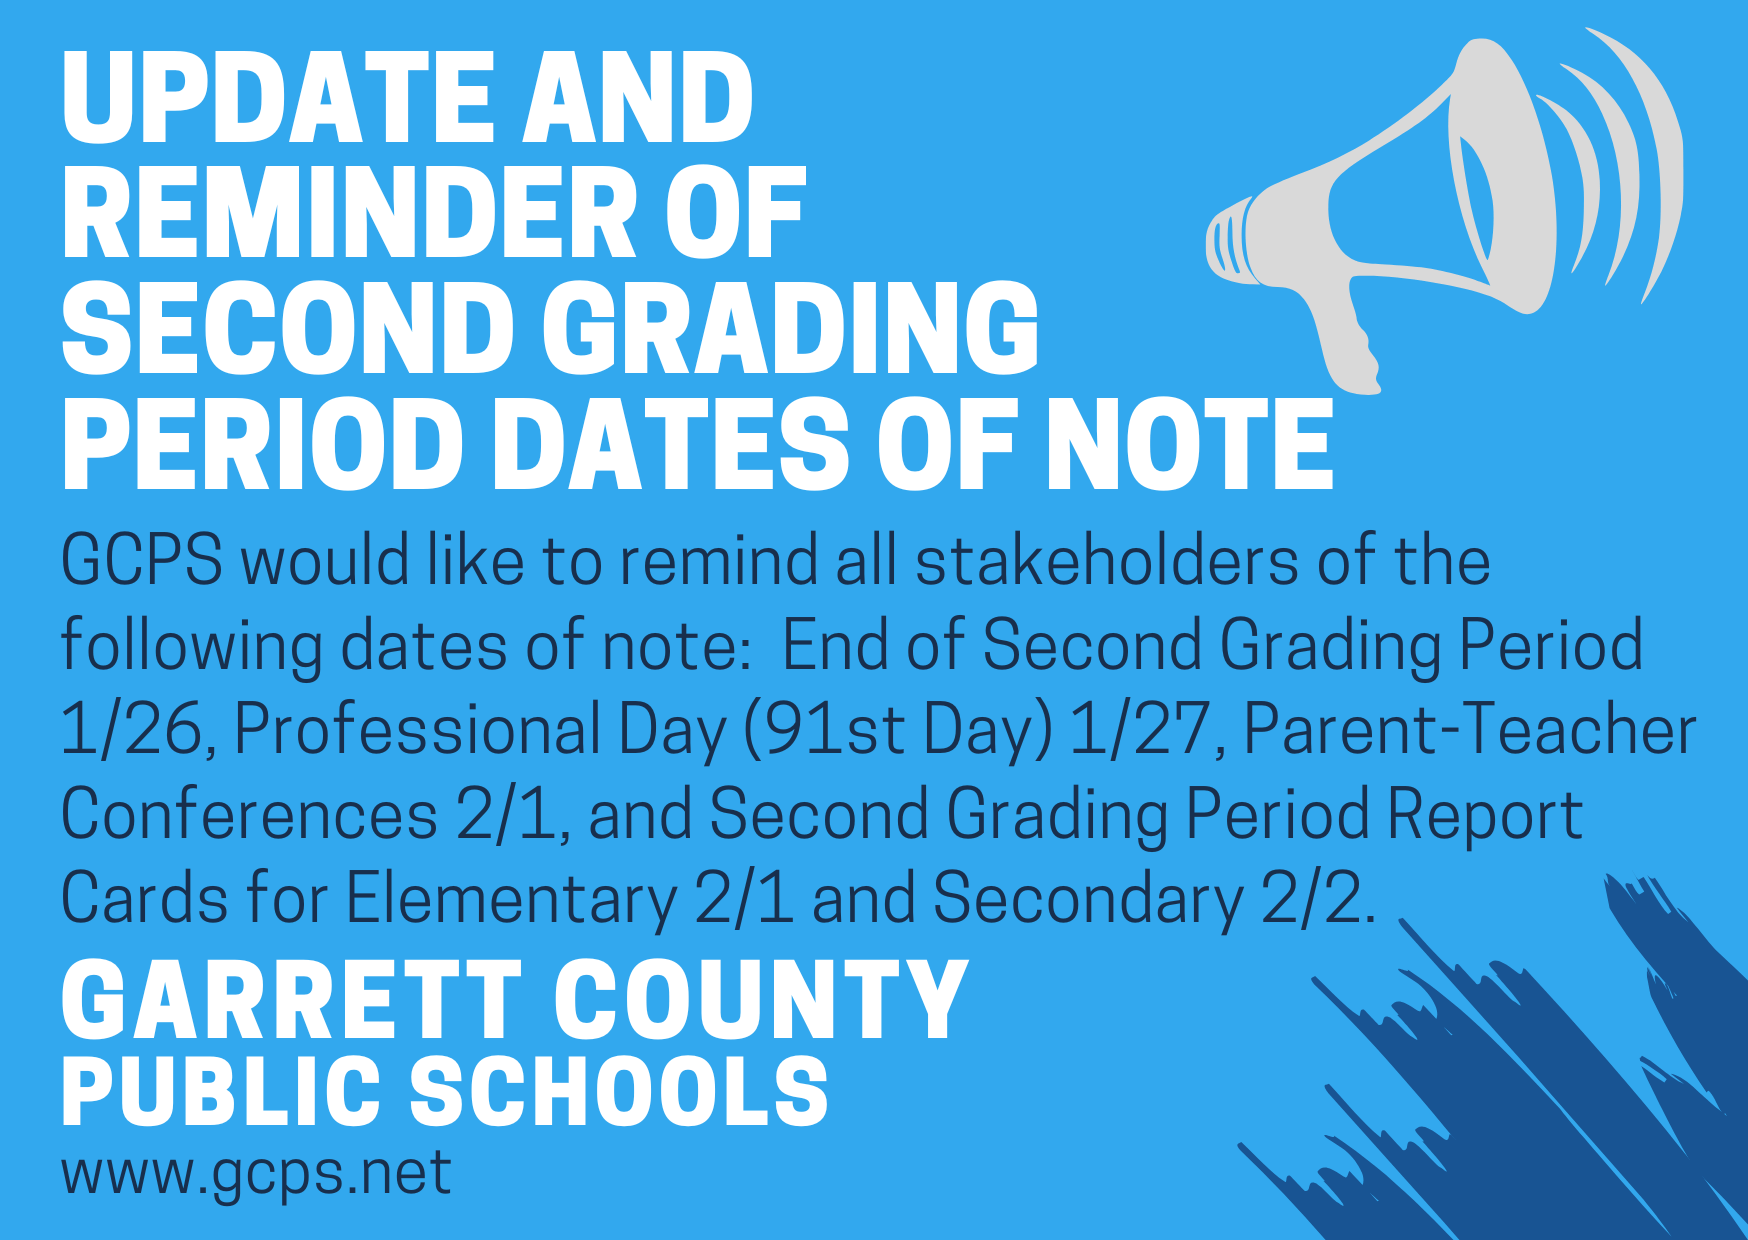 Garrett County Public Schools Update and Reminder of Second Grading Period Dates of Note